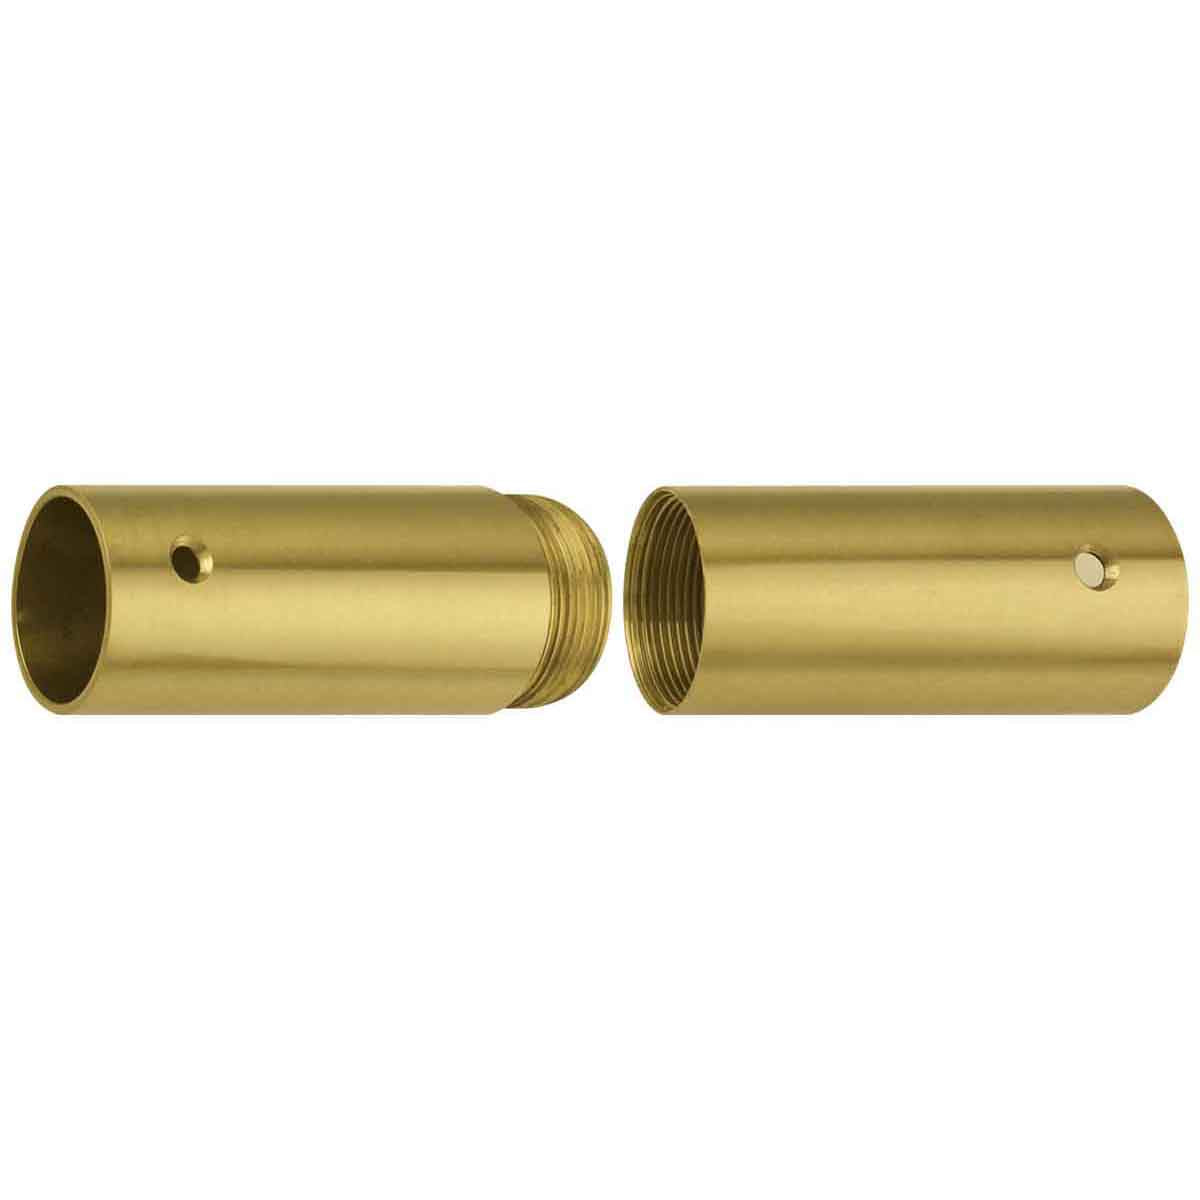 Brass Screw Joints for Wood Poles, available in polished brass or chrome plated.